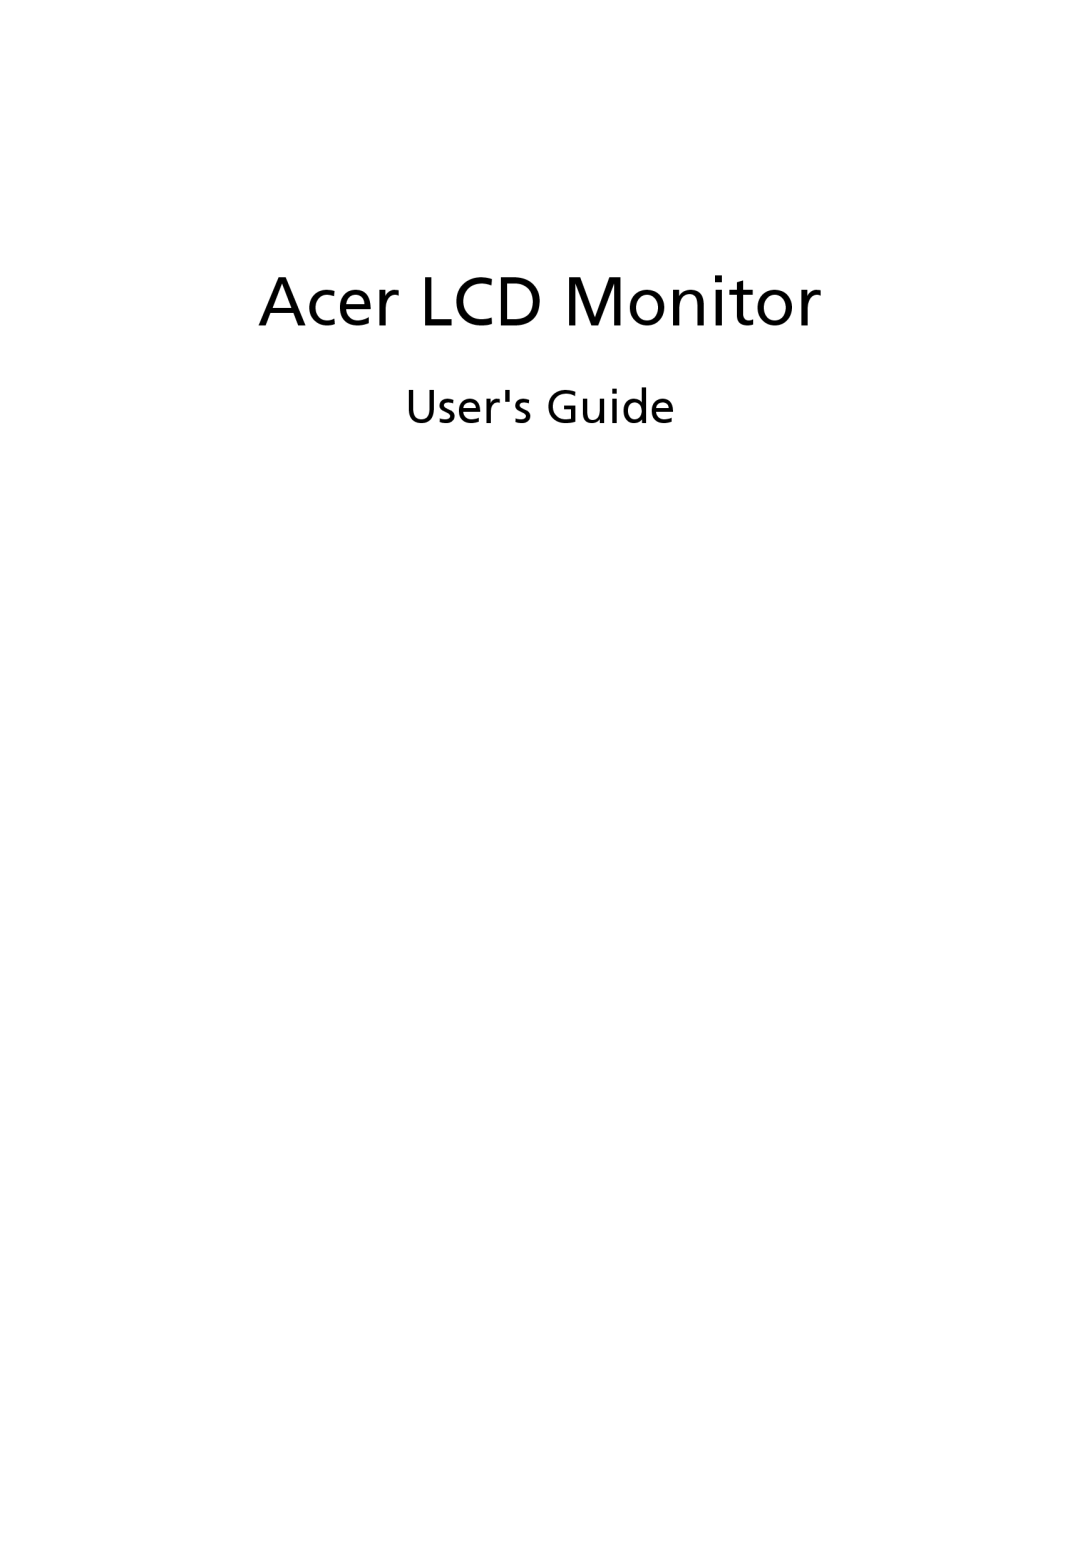 Acer V193 manual Users Guide, Acer LCD Monitor 